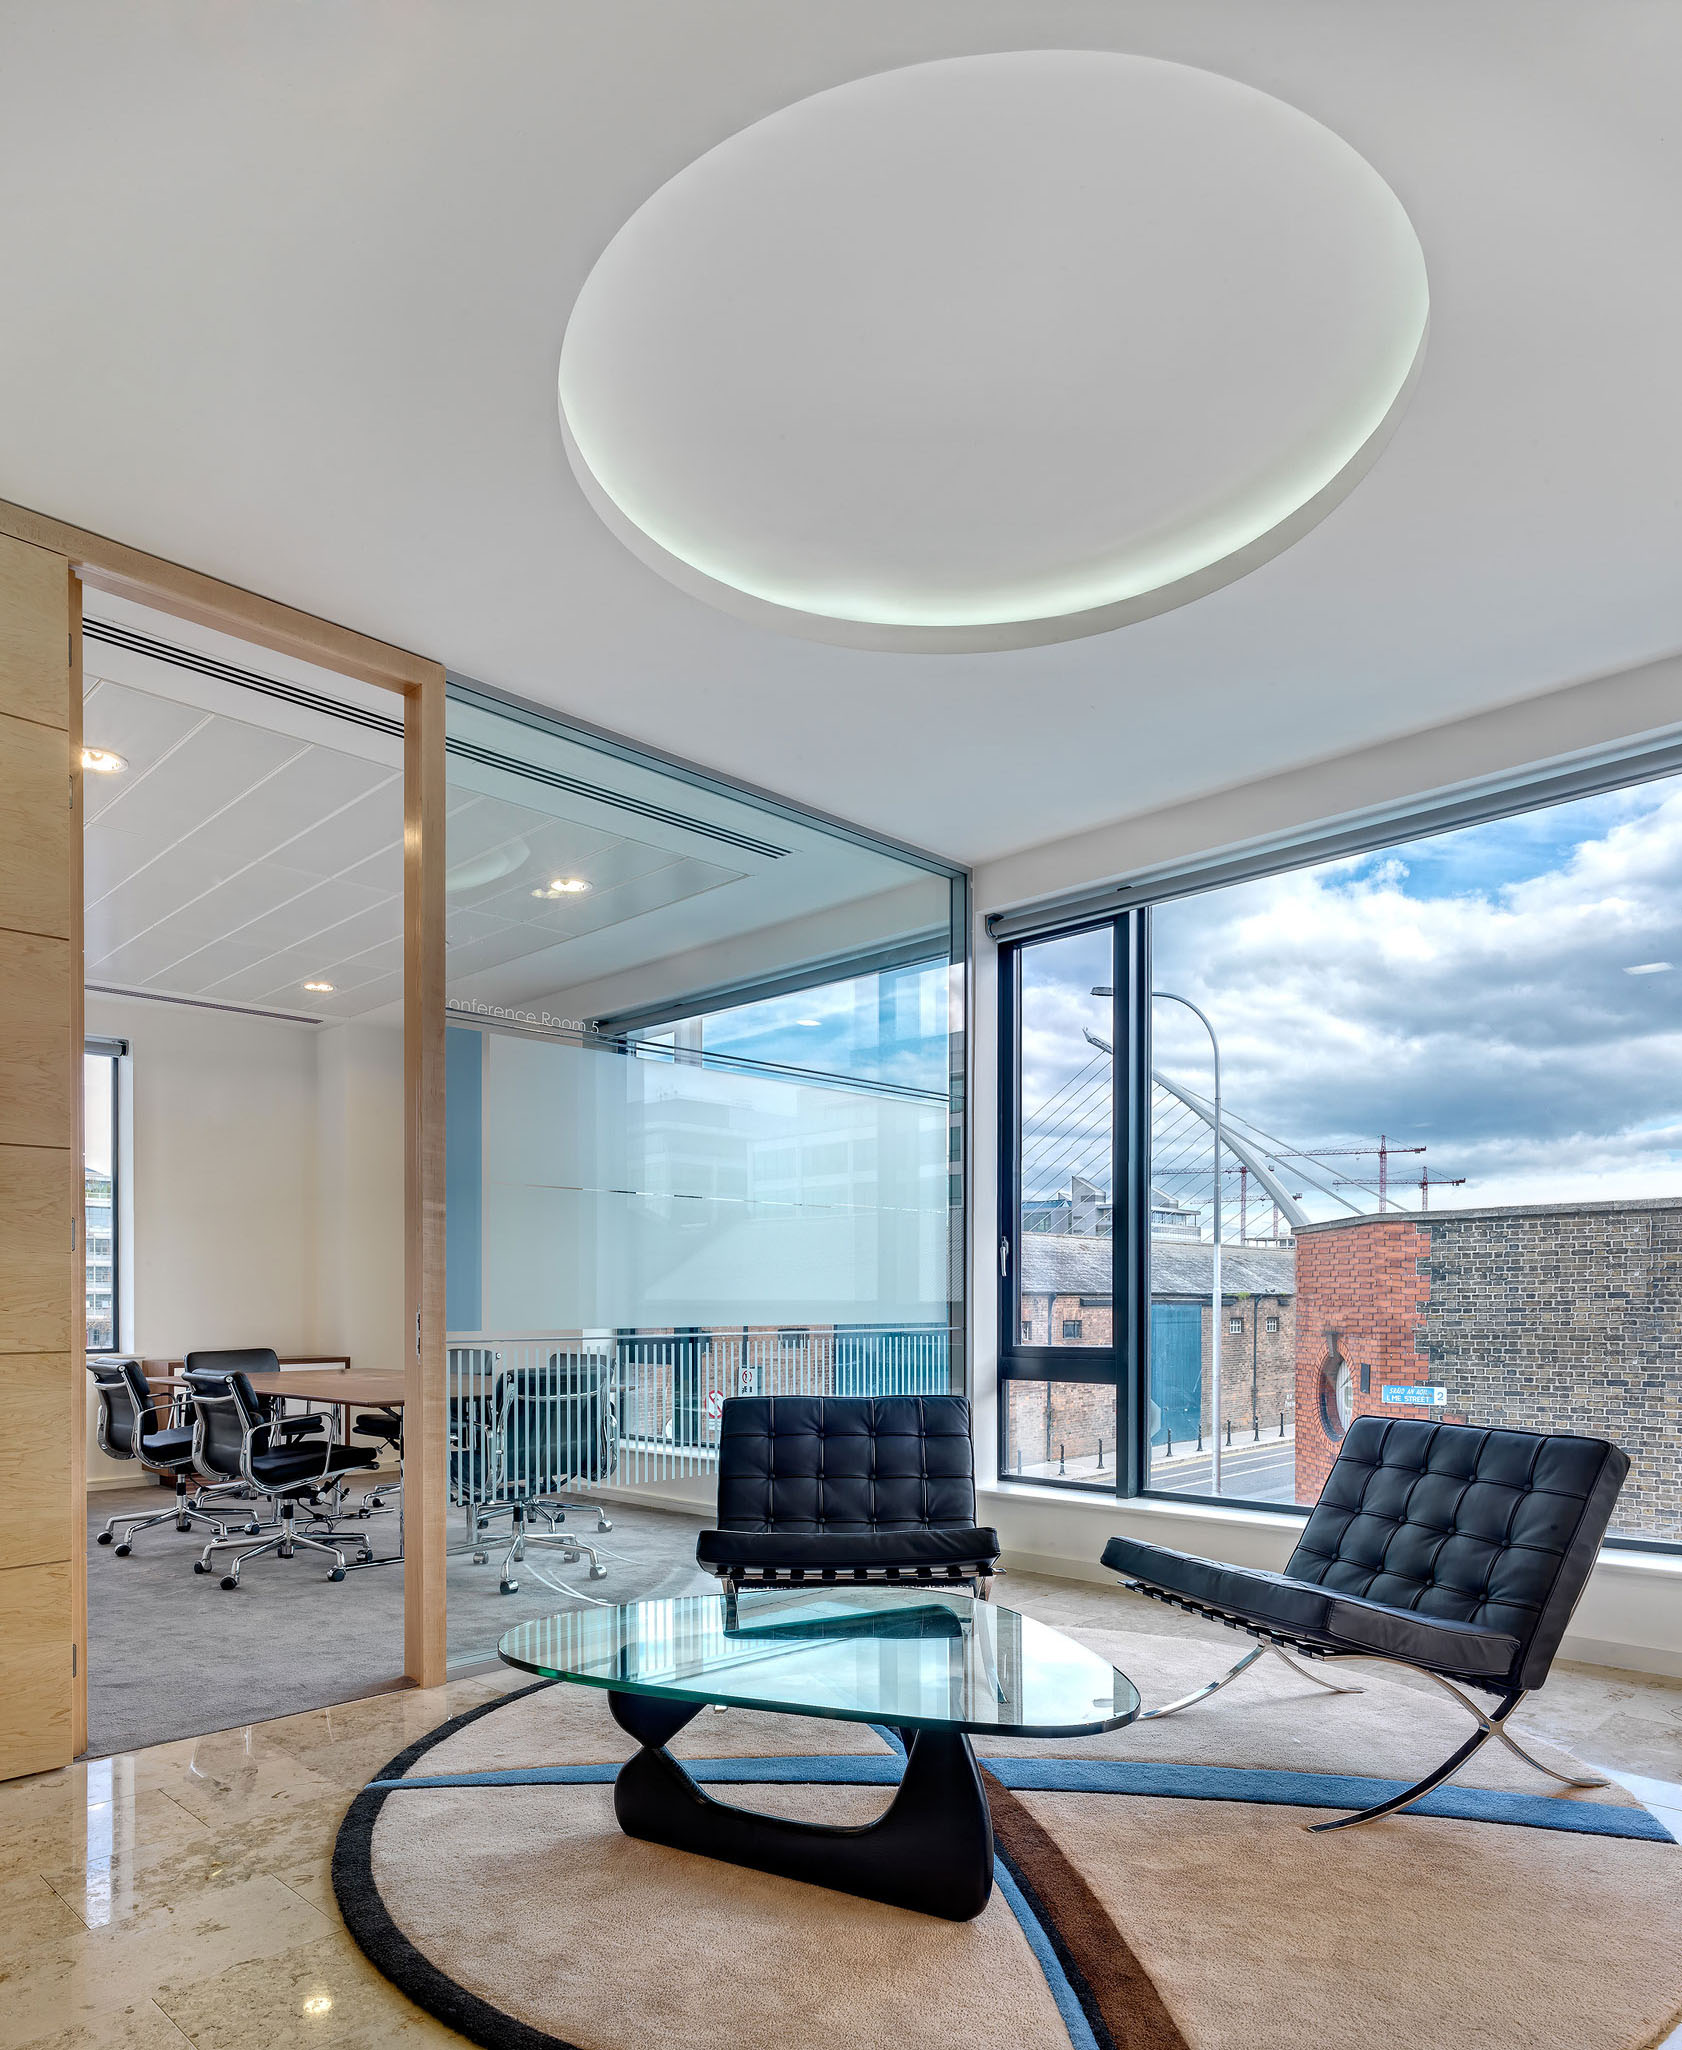 Office fitout photo interiors architecture photography